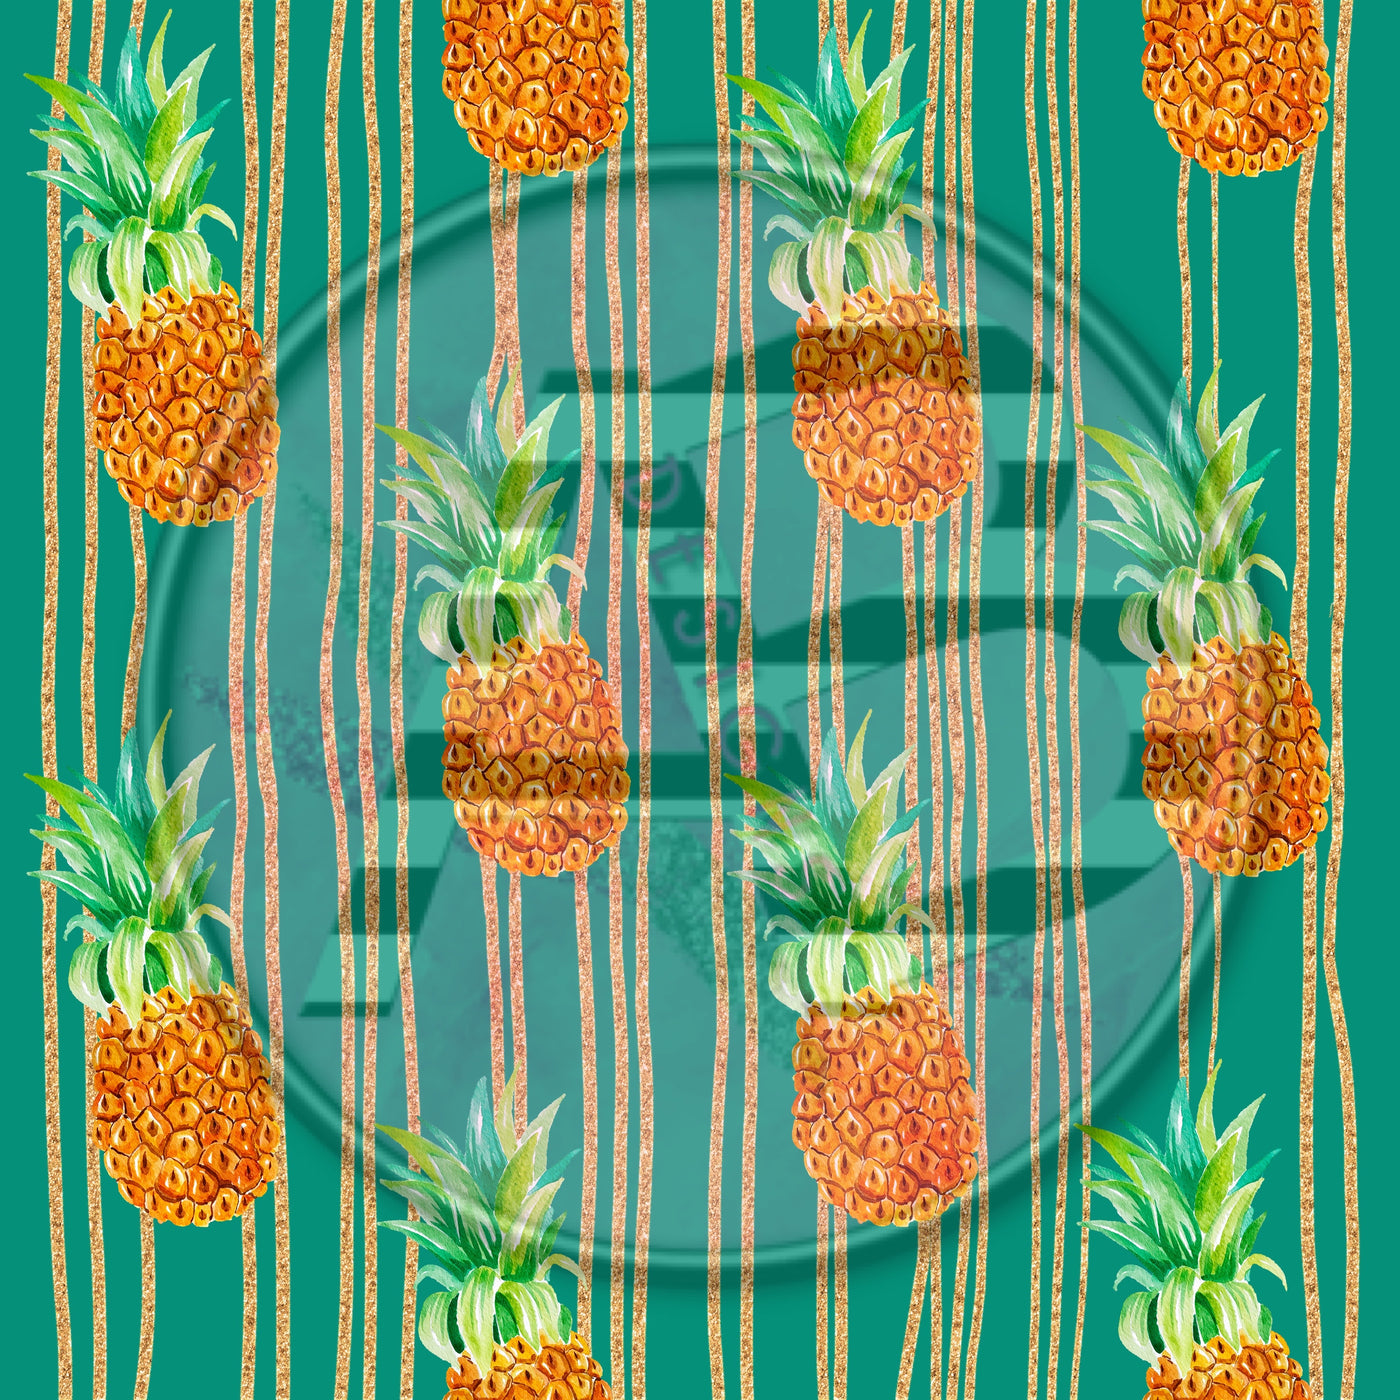 Adhesive Patterned Vinyl - Tropical 709